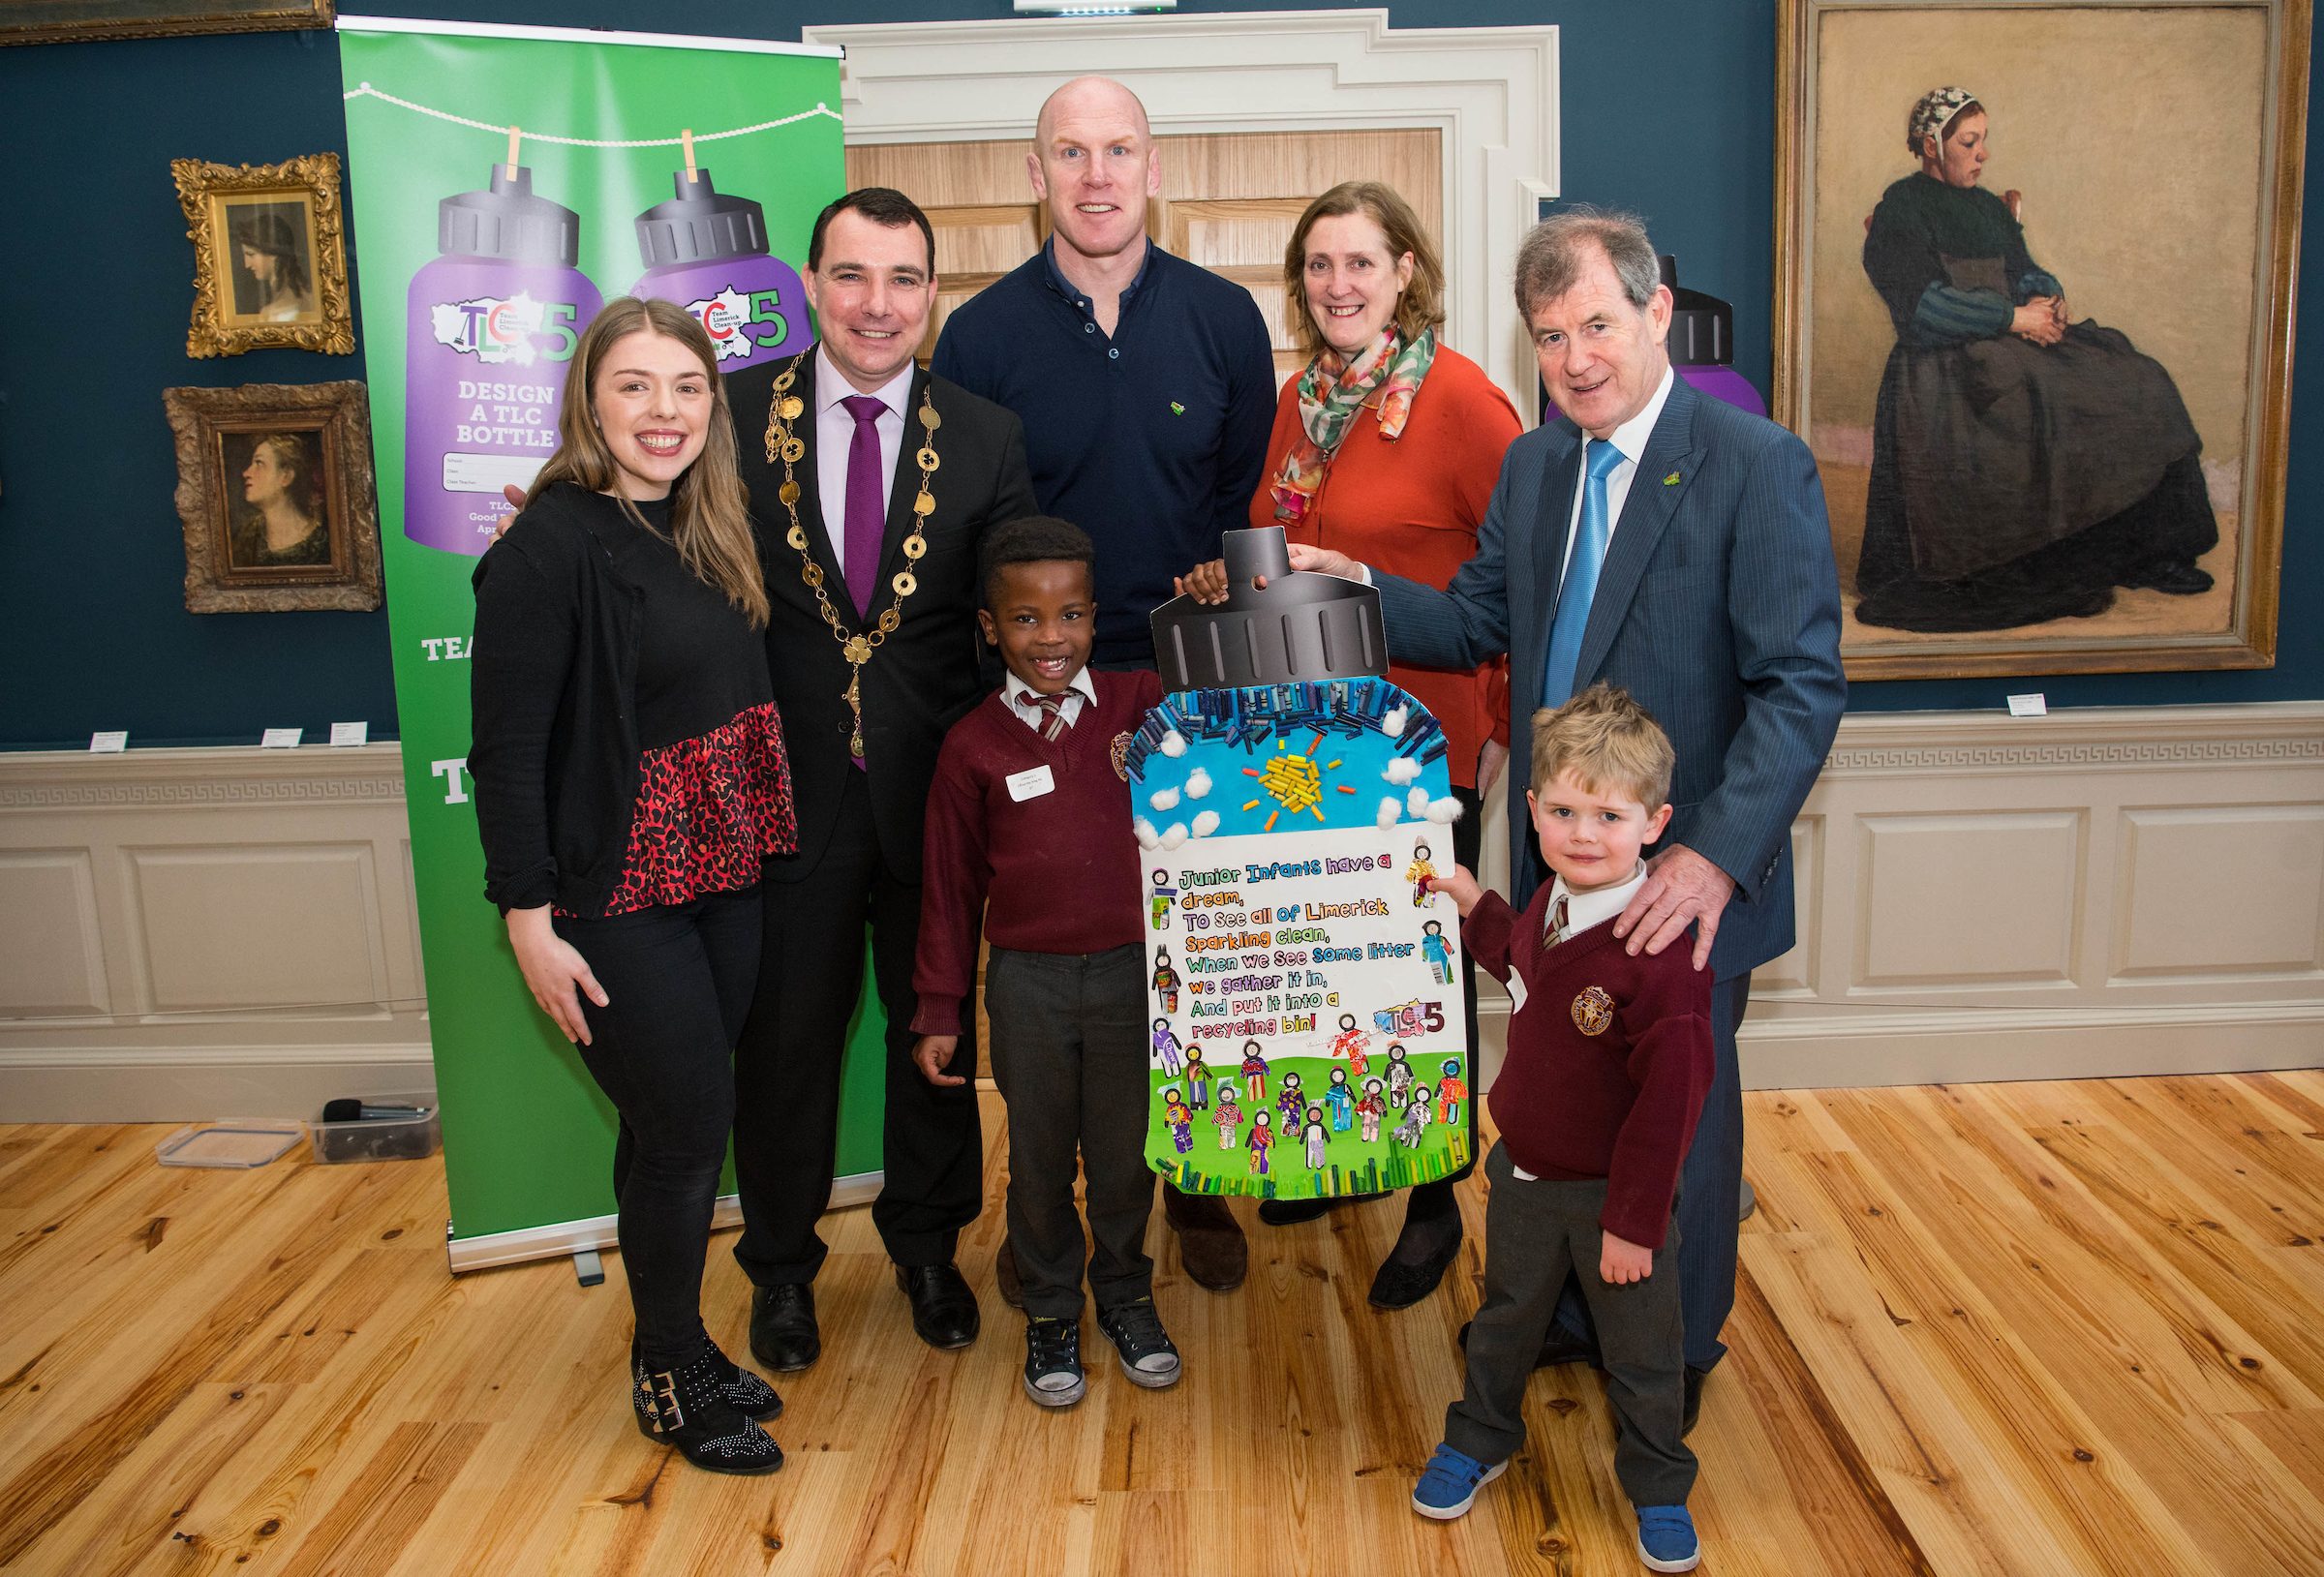 07/03/20193rd place winners of the junior infants-2nd class category are students Tyrone Akumbu and Zack Fennell from Christ the King Boys NS, along with teacher Niamh Walsh, Mayor of Limerick City and County, Cllr James Collins, Paul O'Connell, Helen O'Riordan and JP McManus at the 'Design a TLC Bottle' prizegiving at the Hunt Museum, Limerick. Over 50 primary schools across the county entered ahead of Team Limerick Clean-Up 5, which will see thousands of volunteers take to the streets of Limerick city and county for Europe's largest one-day clean up. Sponsored by the JP McManus Benevolent Fund, the event has seen over 360 tonnes of litter gathered from the streets since inception in 2015. Over 14,000 volunteers have already signed up for the 2019 event, taking place on Good Friday, 19th April. Photo by Diarmuid Greene